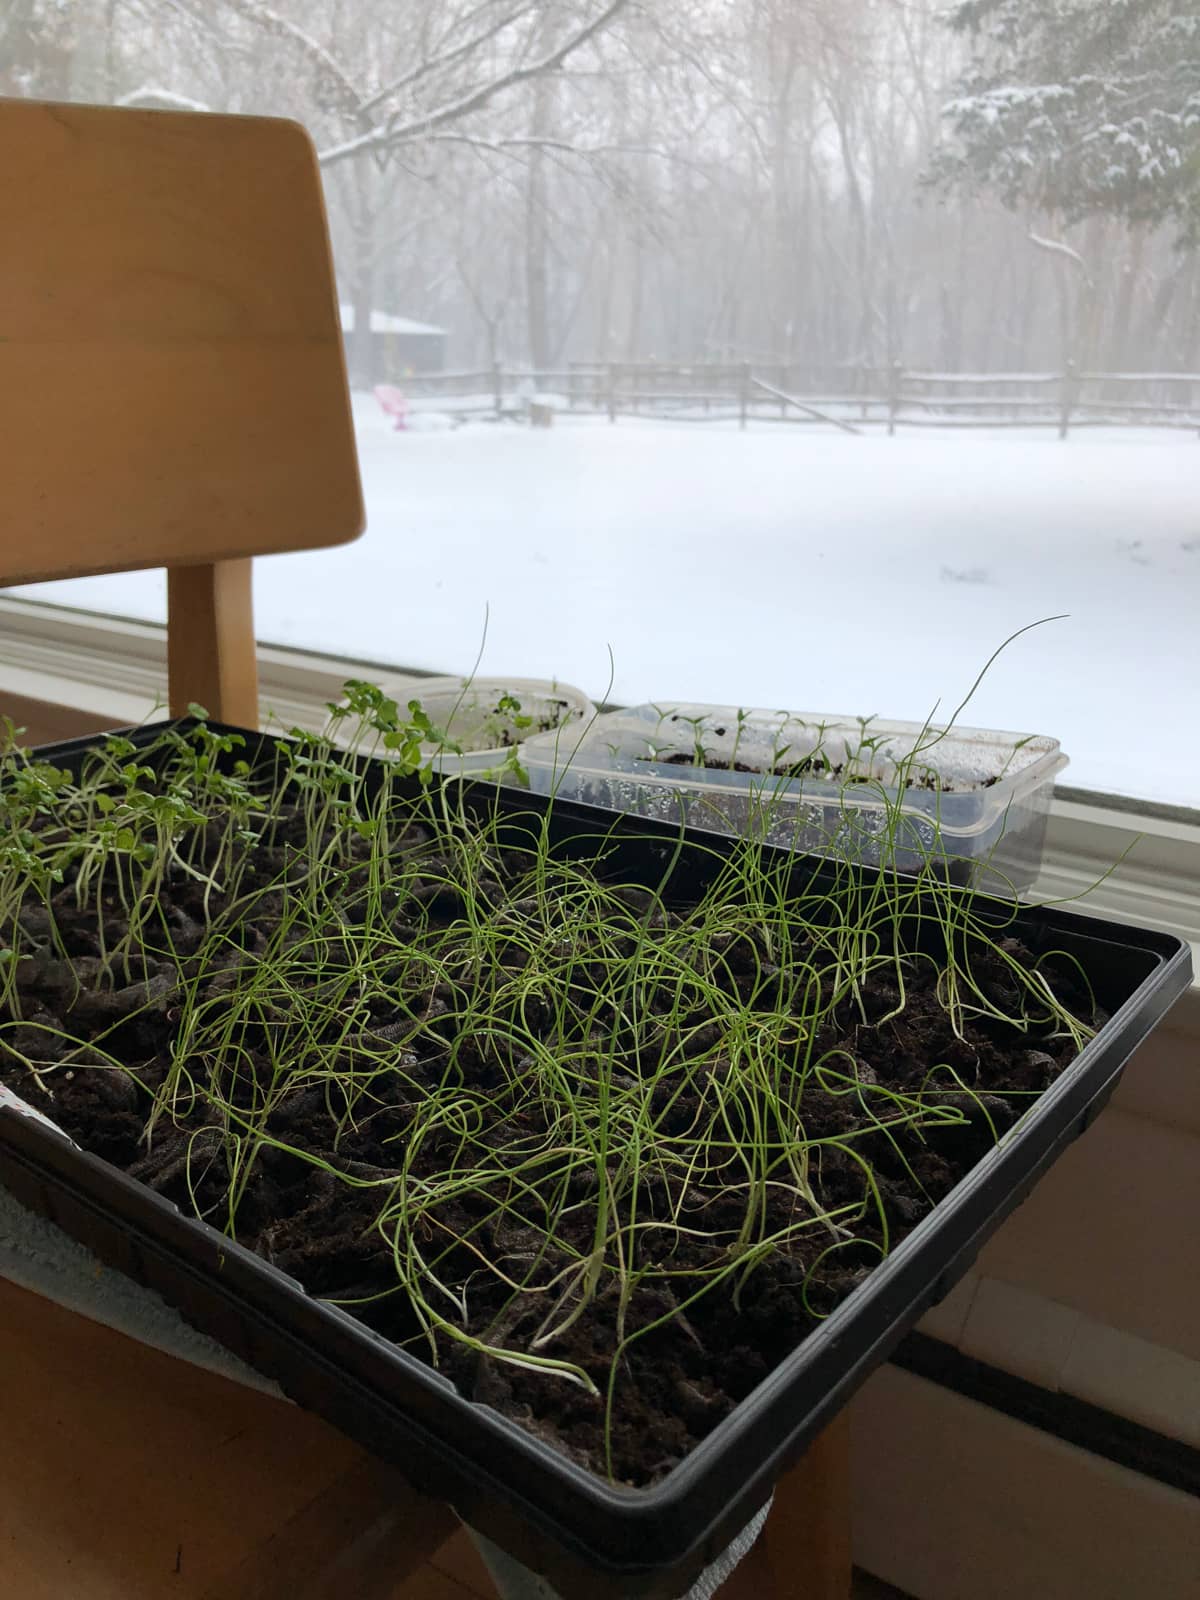 Growing leeks from seed indoors in a bright window.